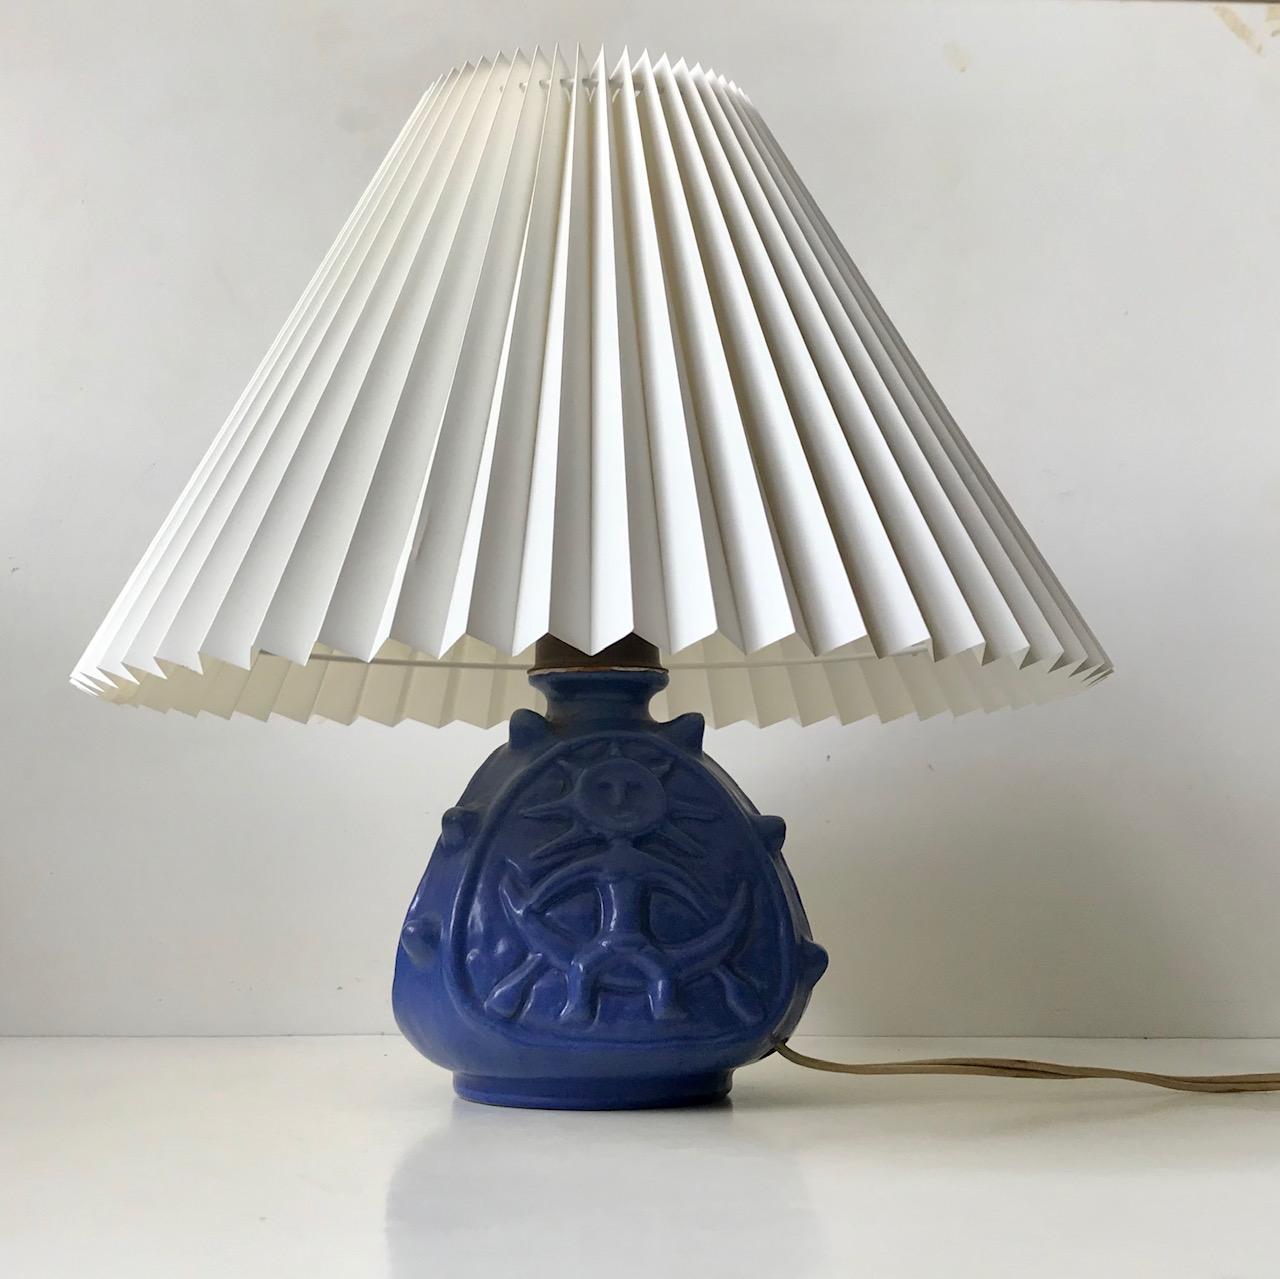 Spiky Blue Ceramic Table Lamp with Troll by Lauritz Hjorth, 1940s In Good Condition For Sale In Esbjerg, DK